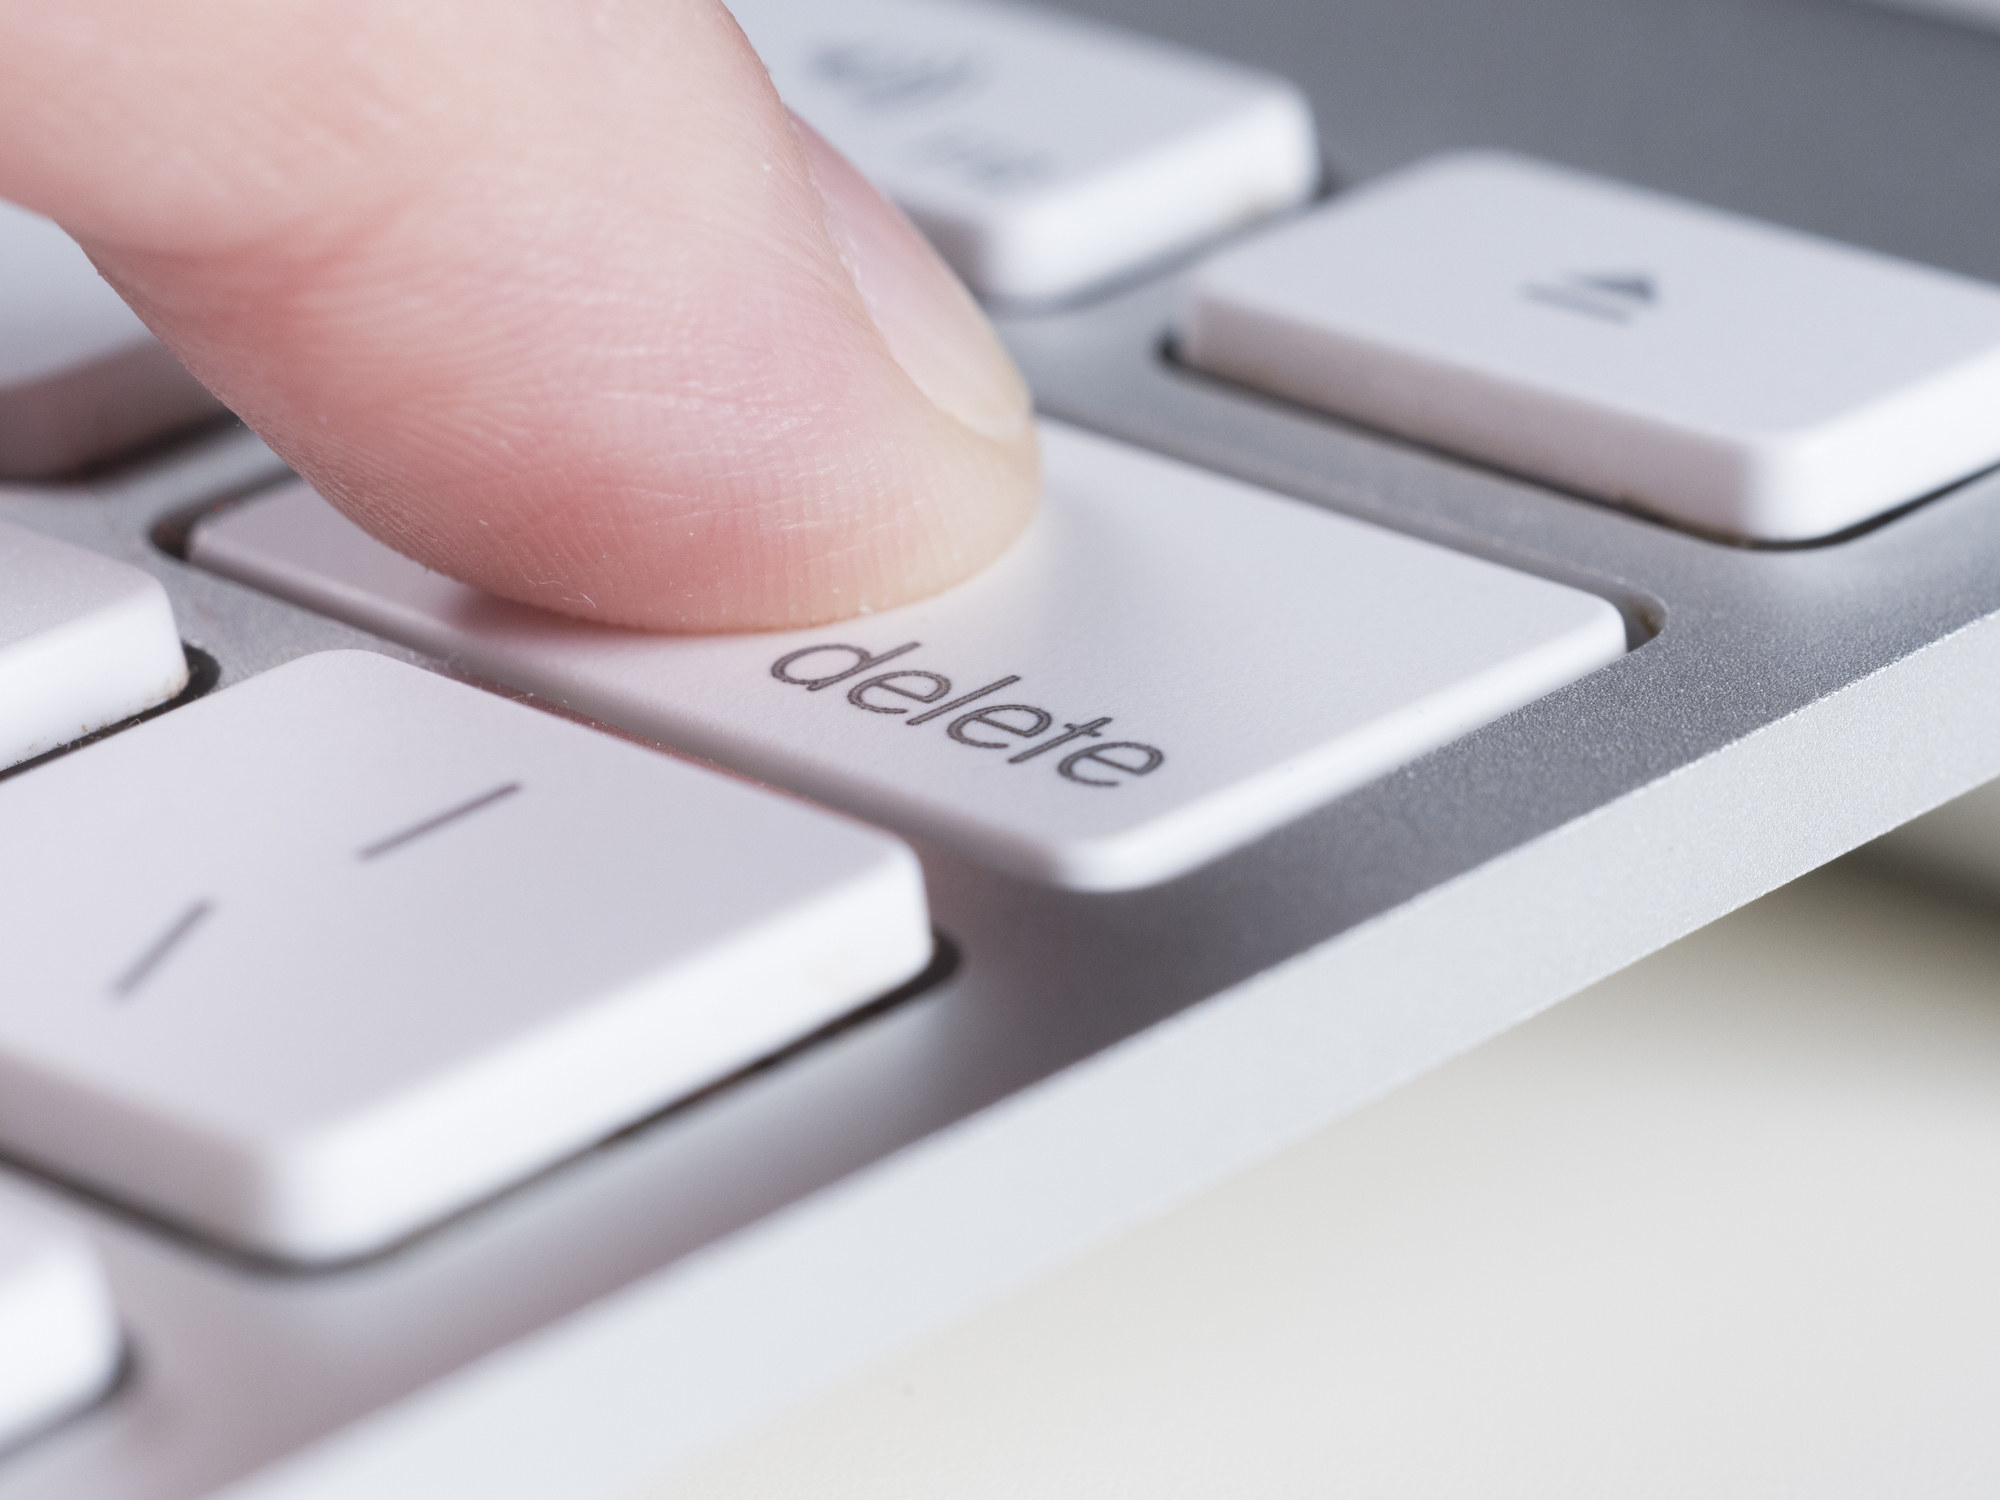 A finger presses the delete key on a computer